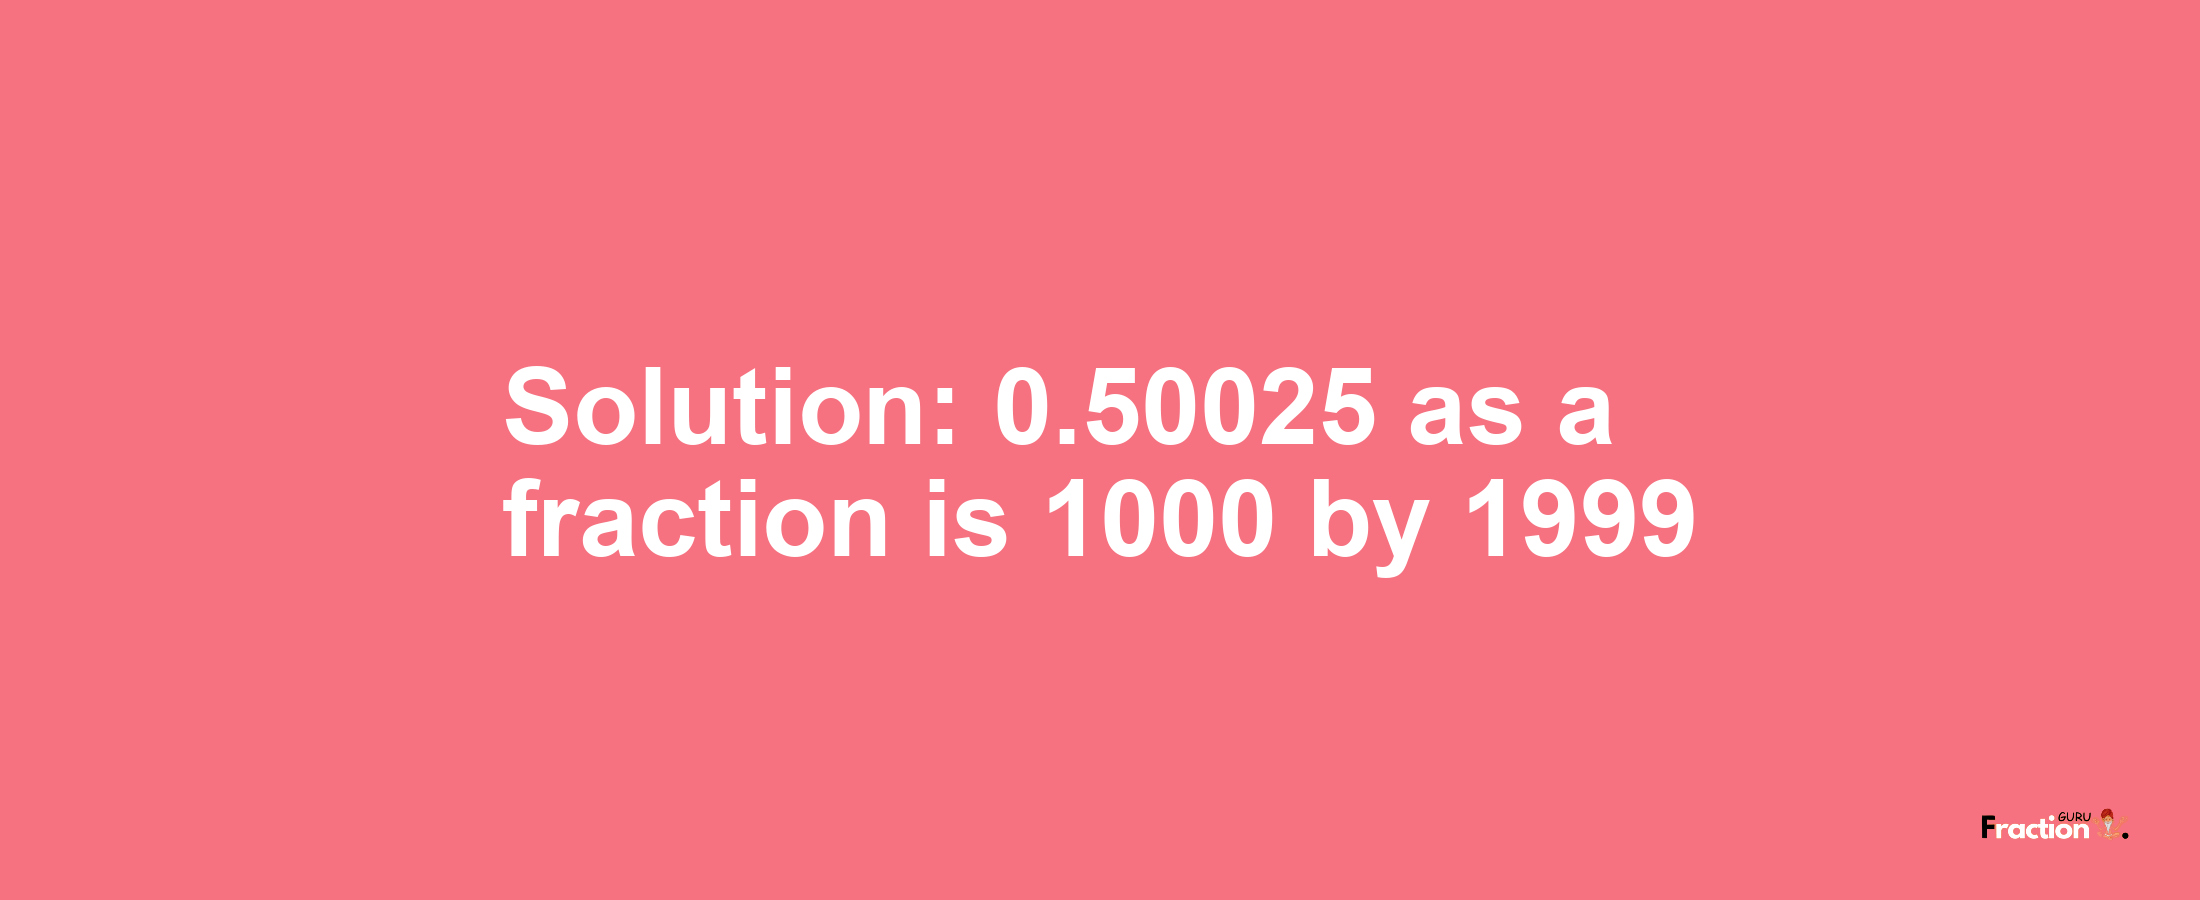 Solution:0.50025 as a fraction is 1000/1999